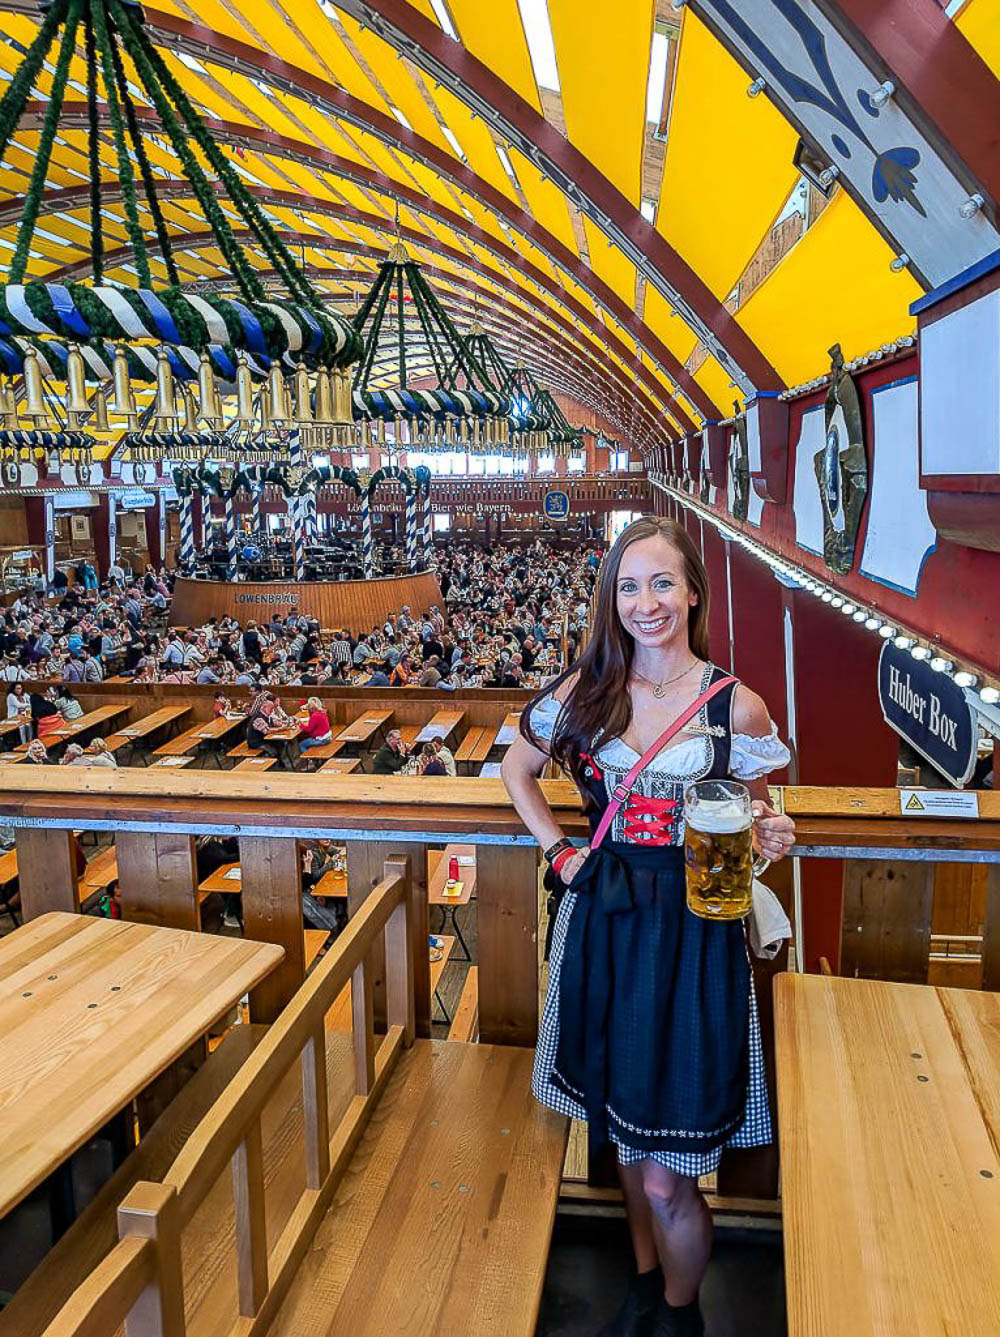 me in a black and red dirndl inside a beer tent at oktoberfest in munich